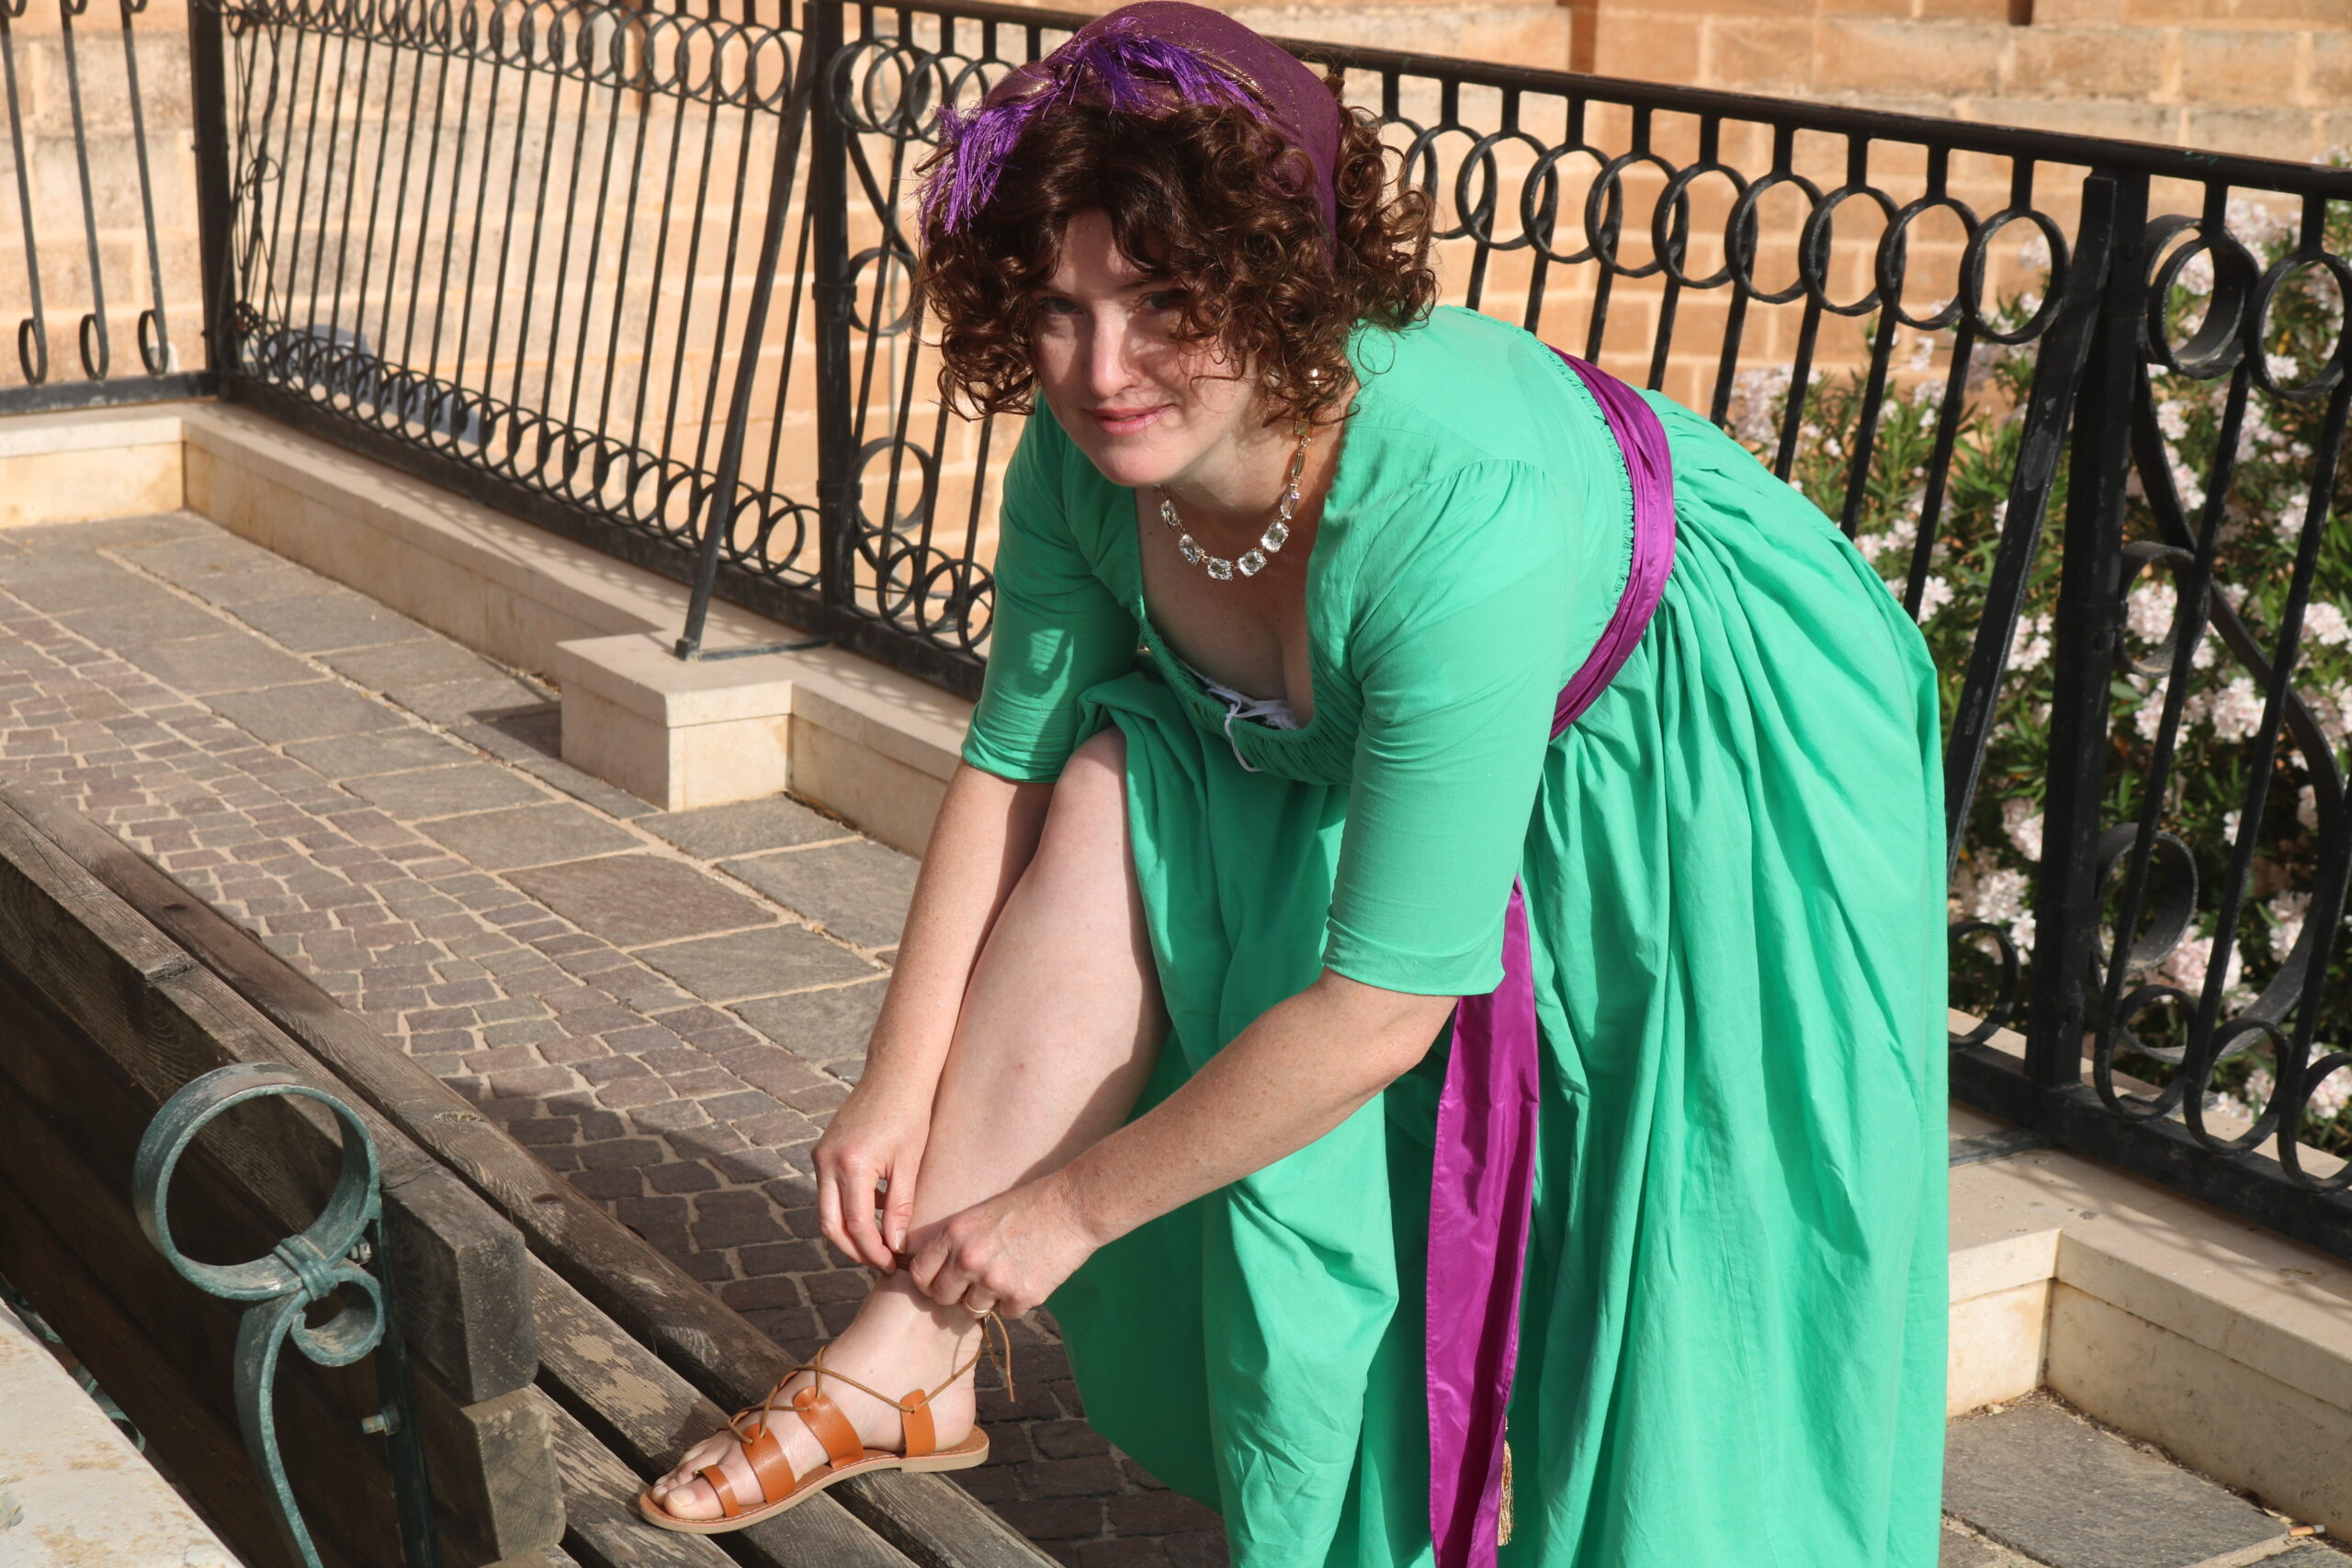 Tabubilgirl wearing a 1790s round gown bends to tie her sandal